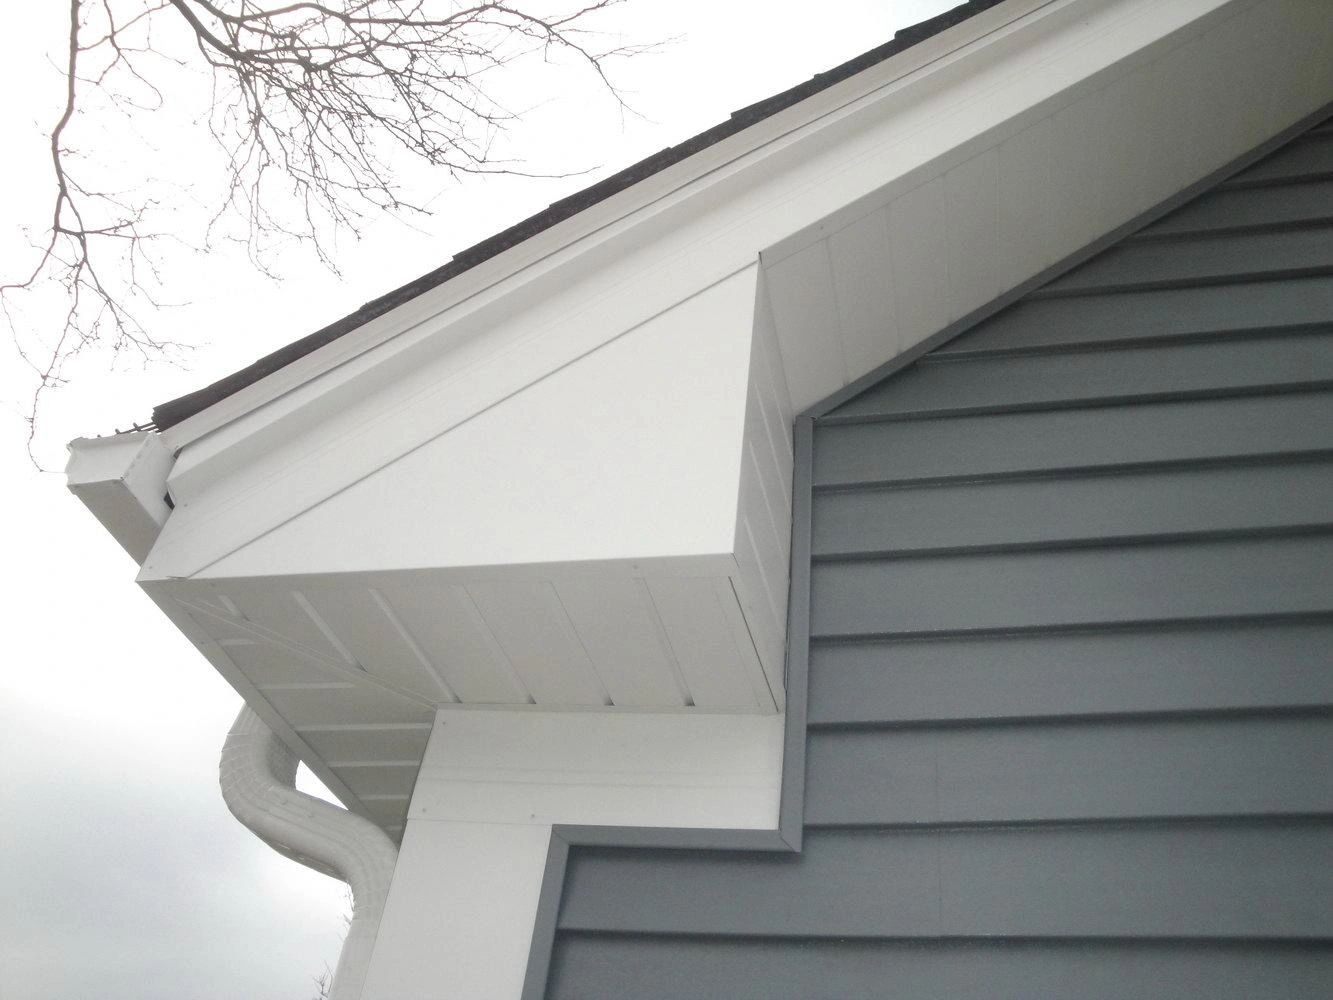 Soffit and fascia replacement in Hampton, Newport News, Yorktown and Poquoson.